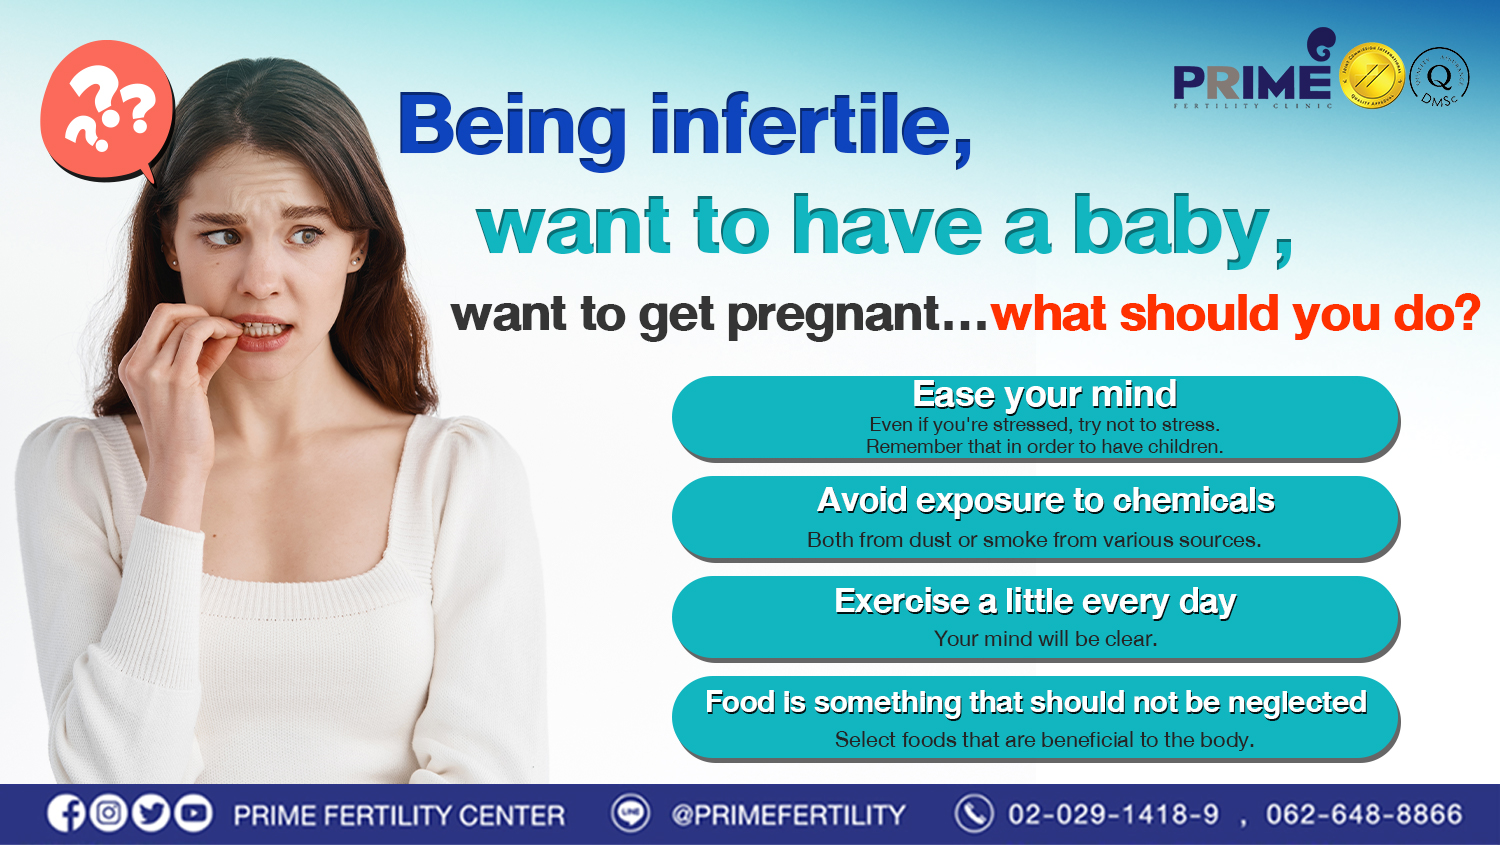 Being infertile, want to have a baby, want to get pregnant…what should you do?